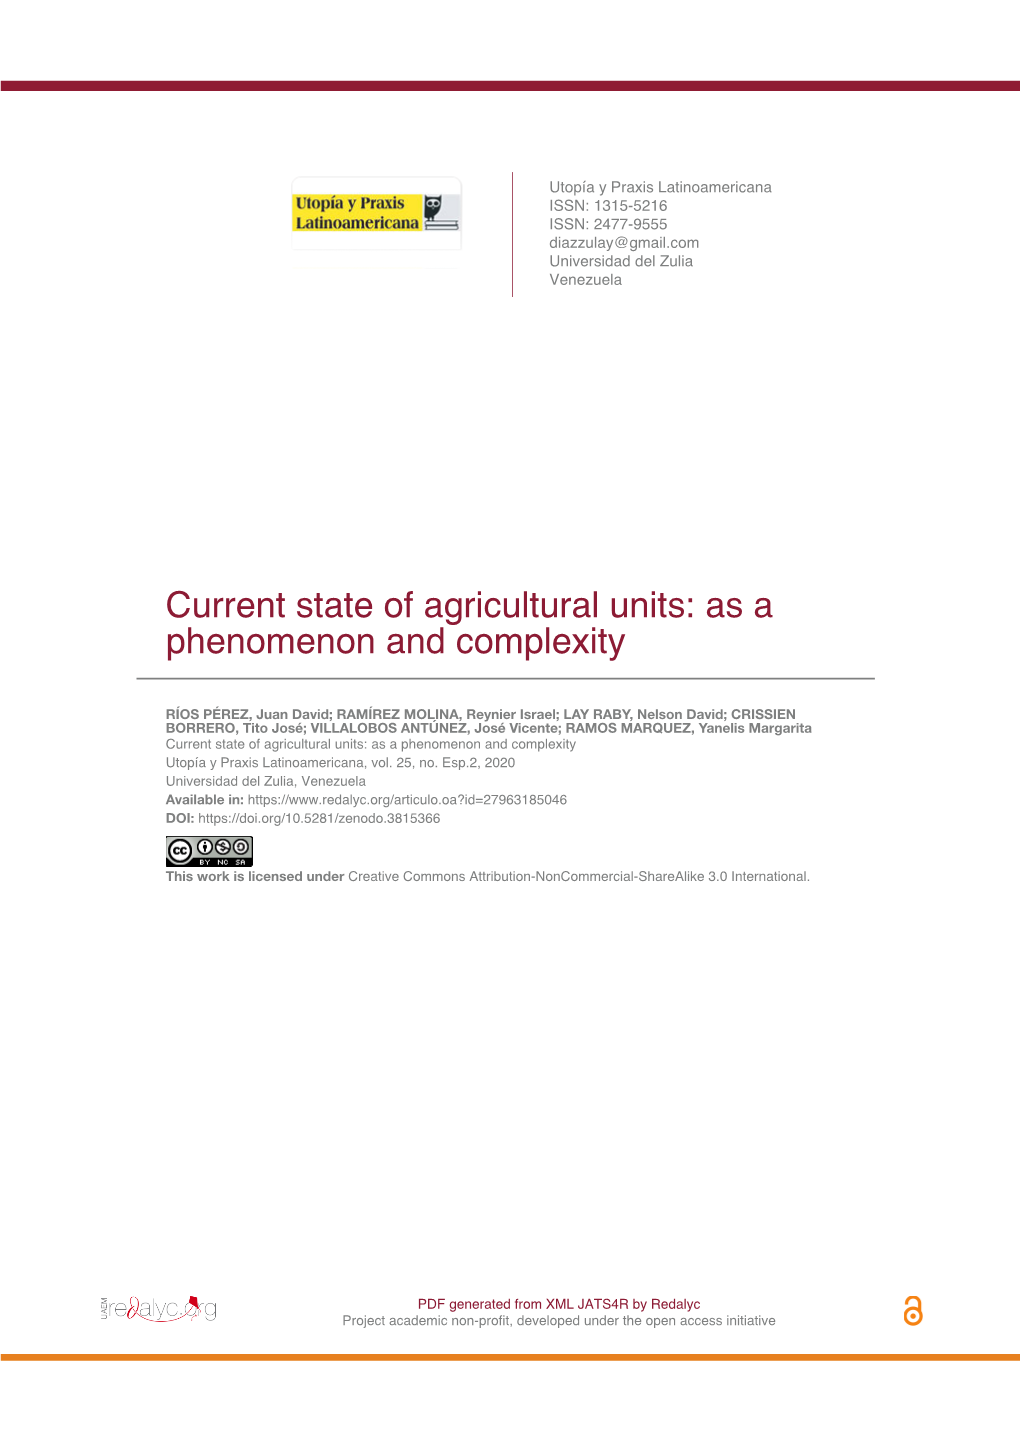 Current State of Agricultural Units: As a Phenomenon and Complexity